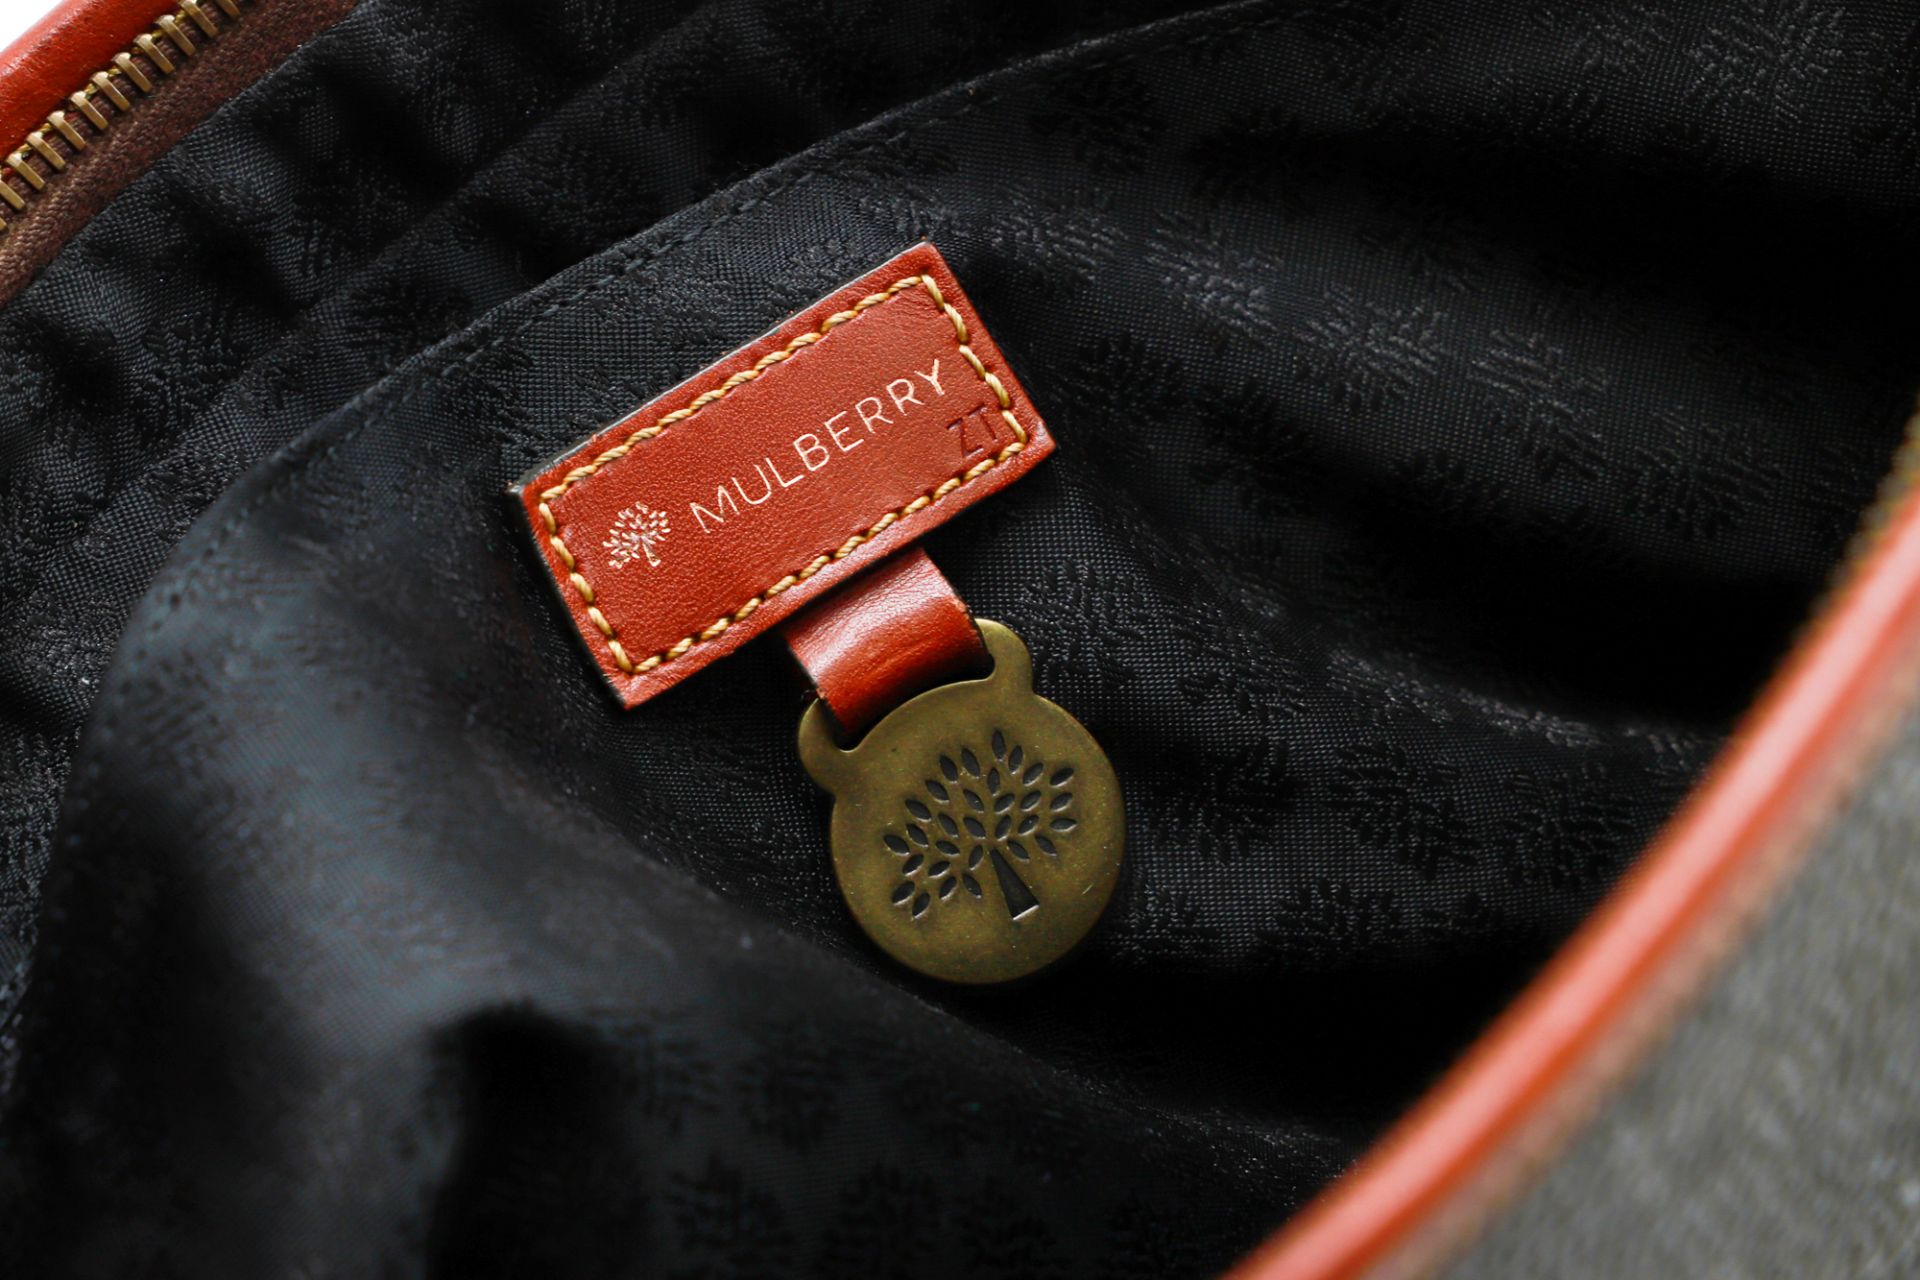 A MULBERRY LEATHER TOTE HANDBAG, the shoulder bag embossed with “Mulberry tag” on the internal - Image 2 of 2